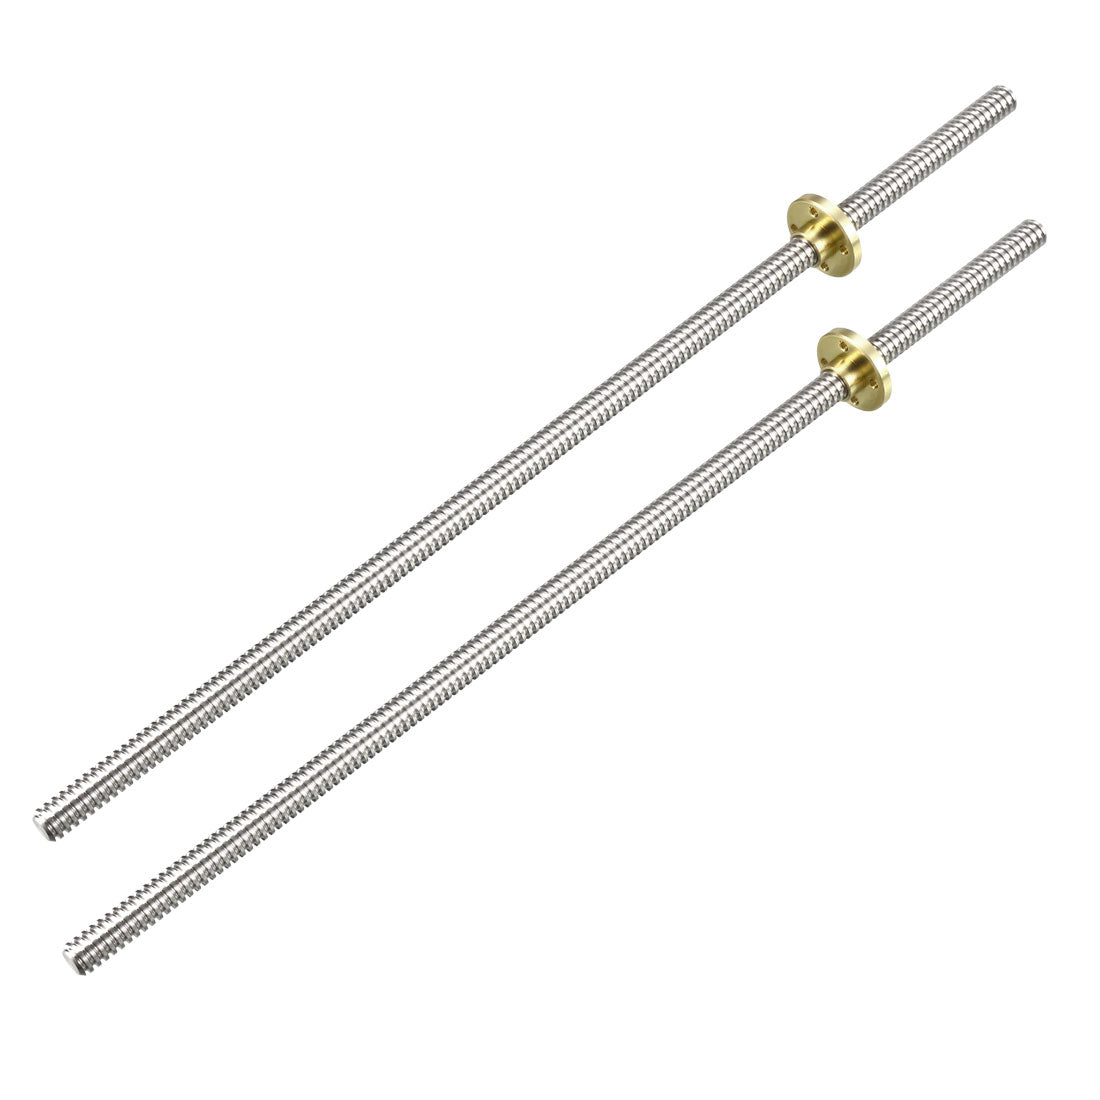 uxcell Uxcell 2PCS 300mm T8 Pitch 2mm Lead 2mm Lead Screw Rod with Copper Nut for 3D Printer